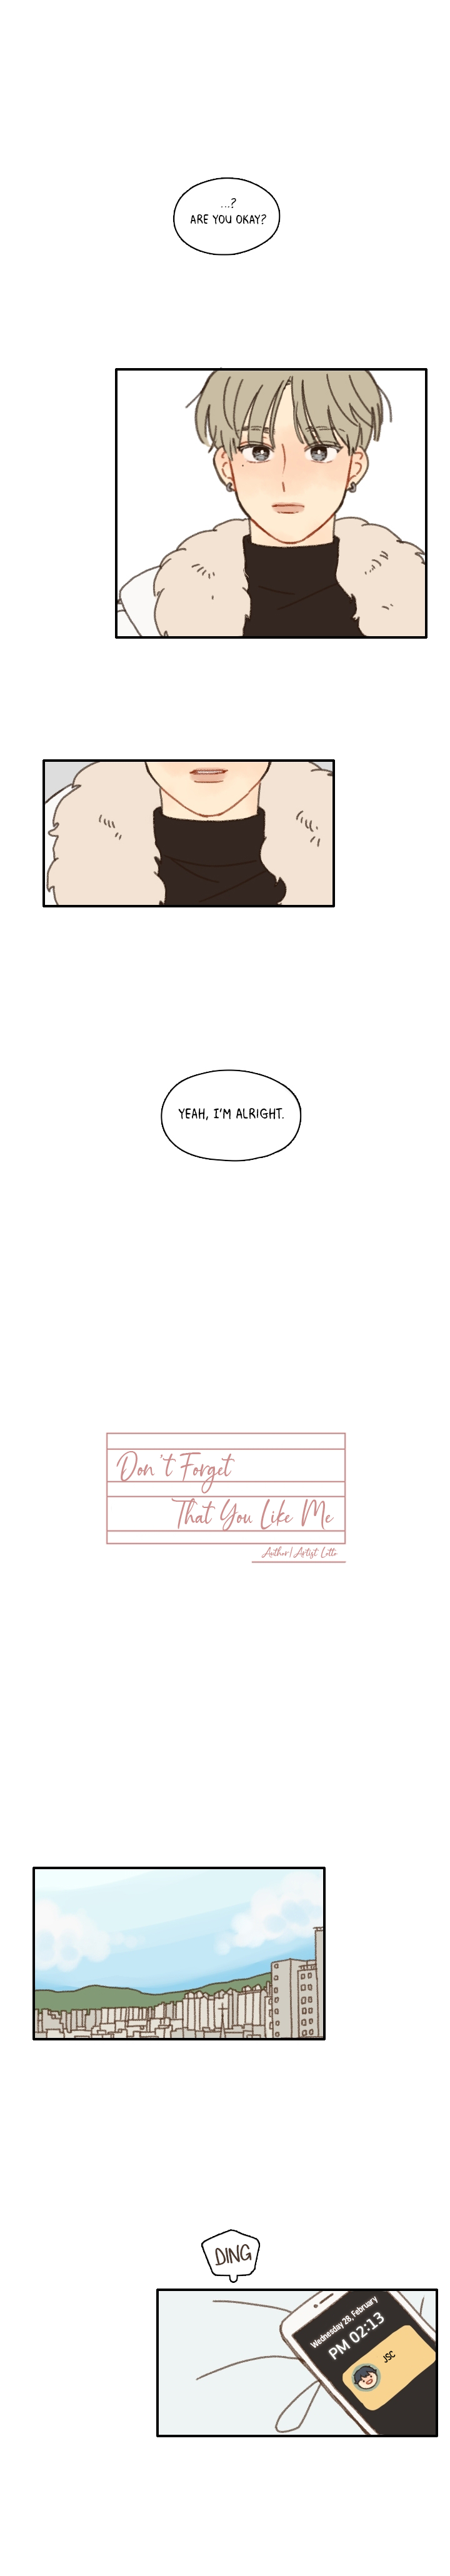 Don't Forget That You Like Me - Page 2